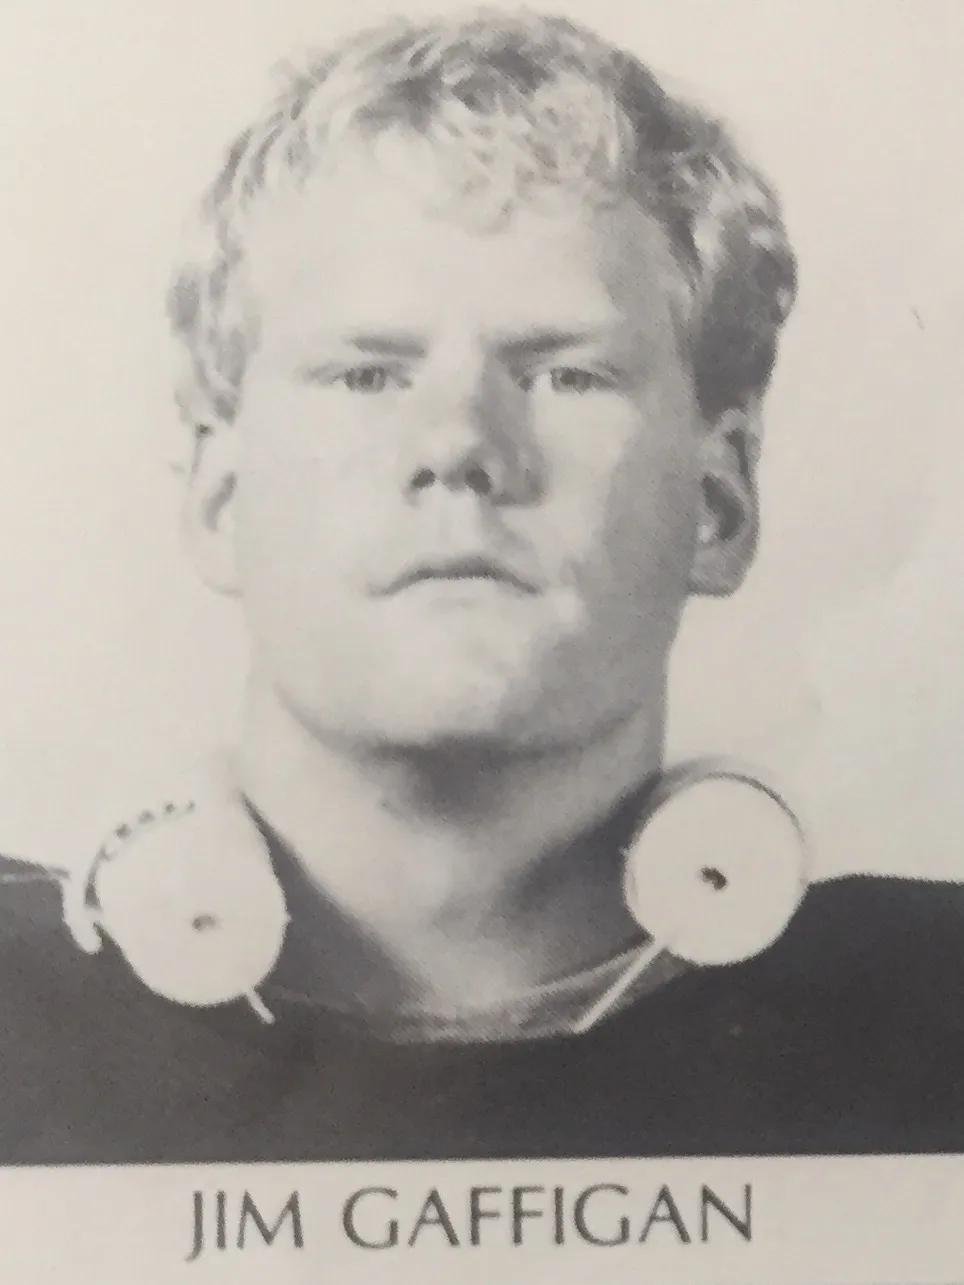 Jim Gaffigan before he was famous as a comedian